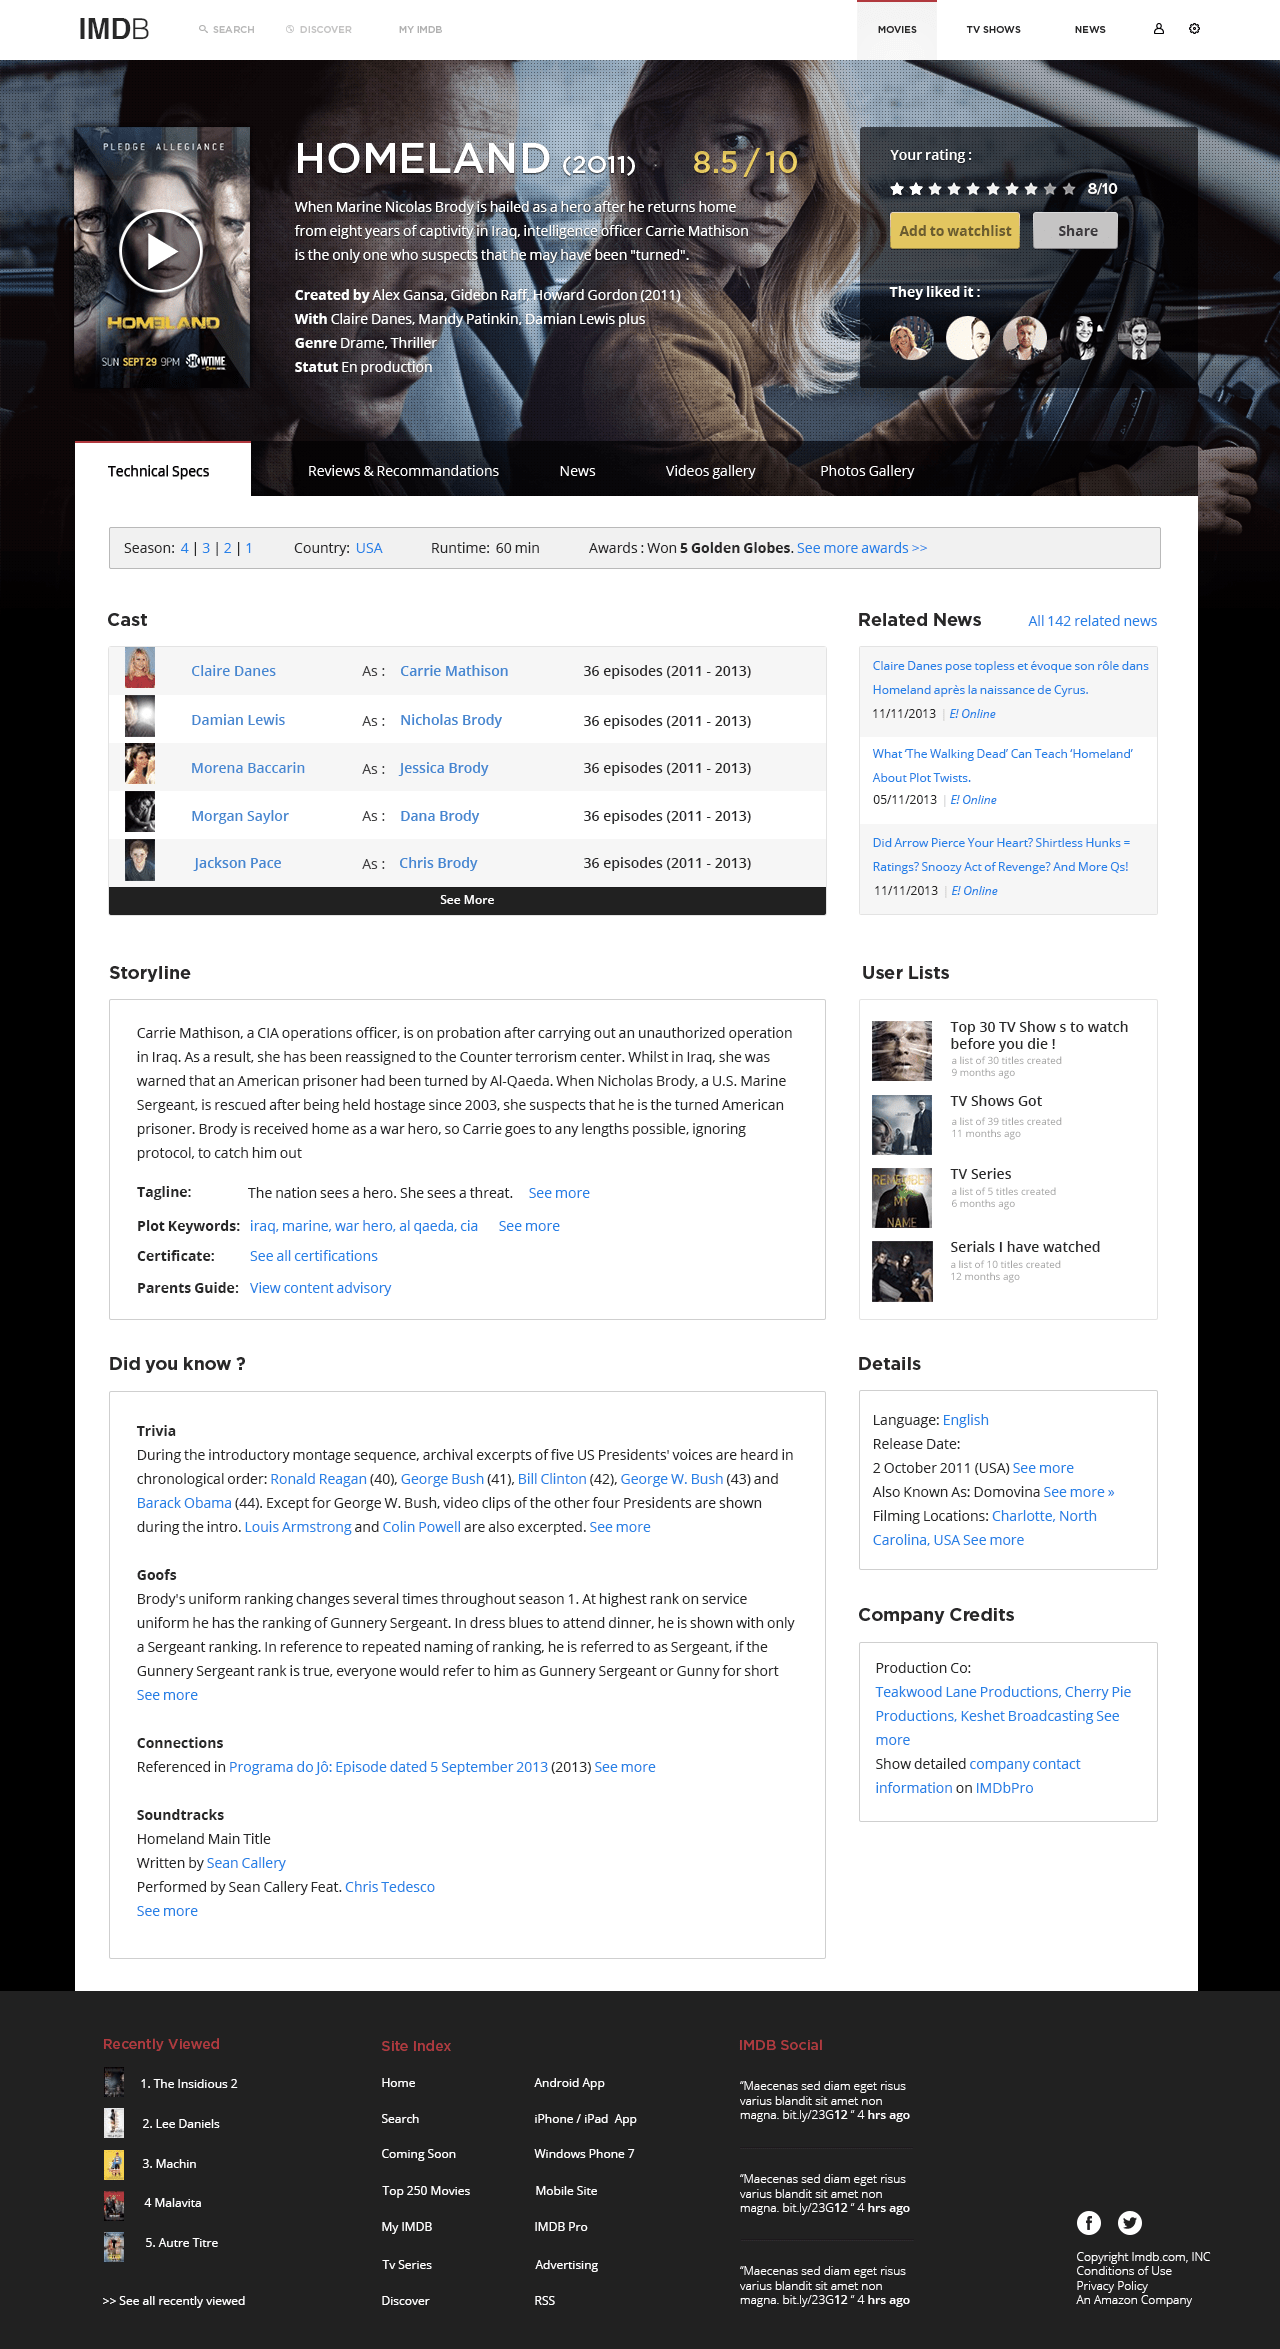 This Beautiful IMDb Redesign Concept Is Long Overdue